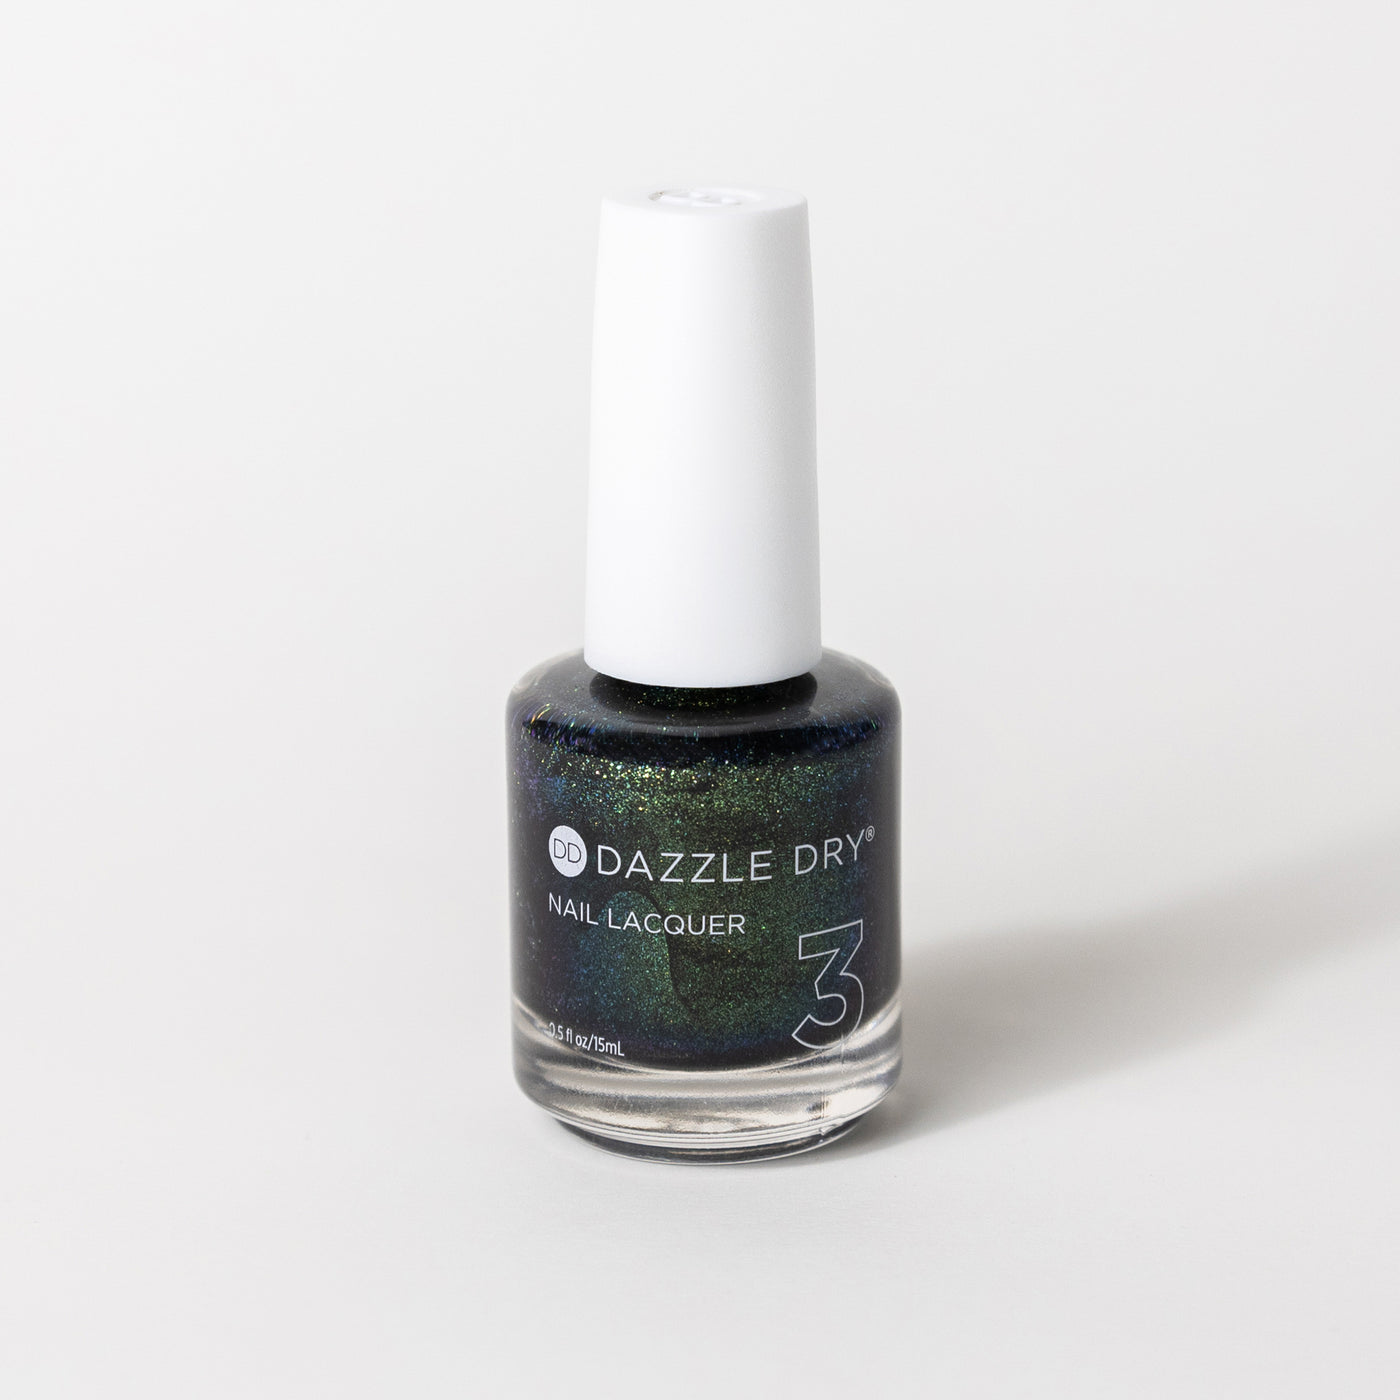 Dragonfly – Dazzle Dry nail lacquer